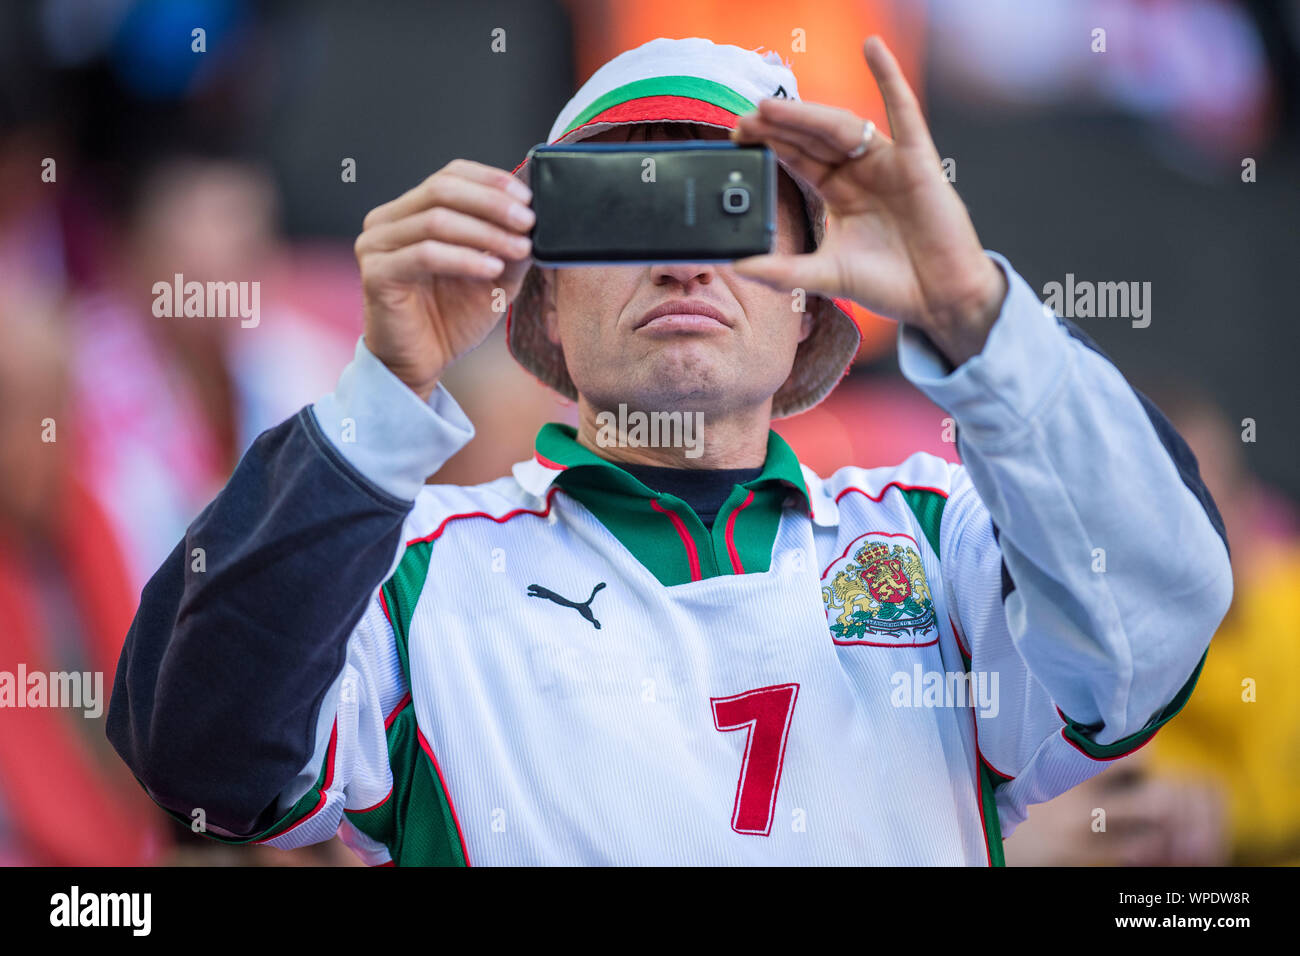 LONDON, ENGLAND - SEPTEMBER 07: Bulgaria fan during the UEFA Euro 2020 qualifier match between England and Bulgaria at Wembley Stadium on September 7, 2019 in London, England. (Photo by Sebastian Frej/MB Media) Stock Photo